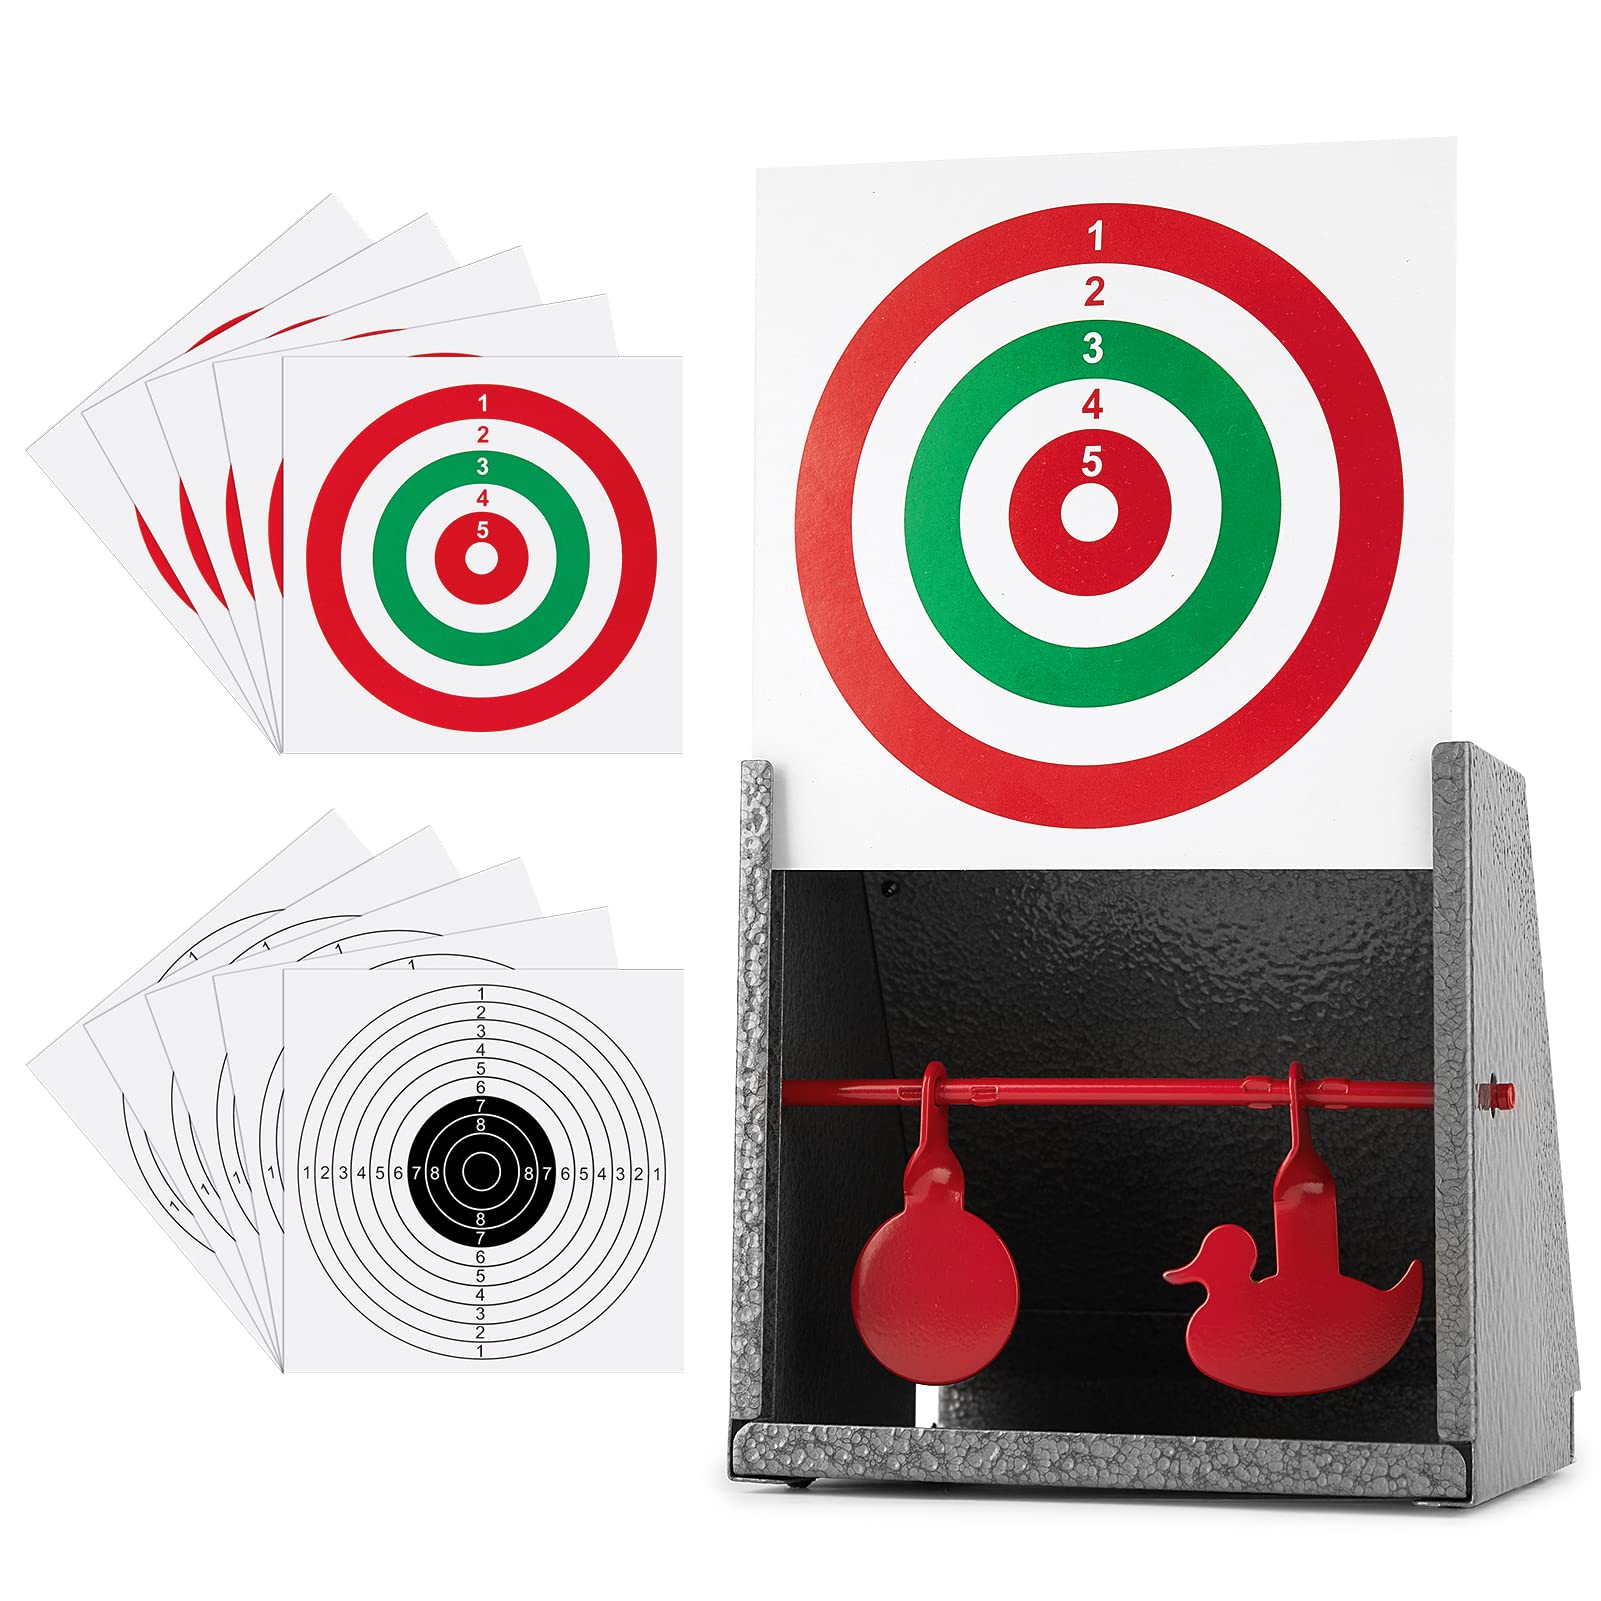  GearOZ Spinning Airsoft Target, 18x9, Pellet Gun Targets,  Air Rifle Targets, Tic-Tac-Toe Designed BB Gun Resetting Shooting Target  Stand for Outdoor, Backyard : Sports & Outdoors